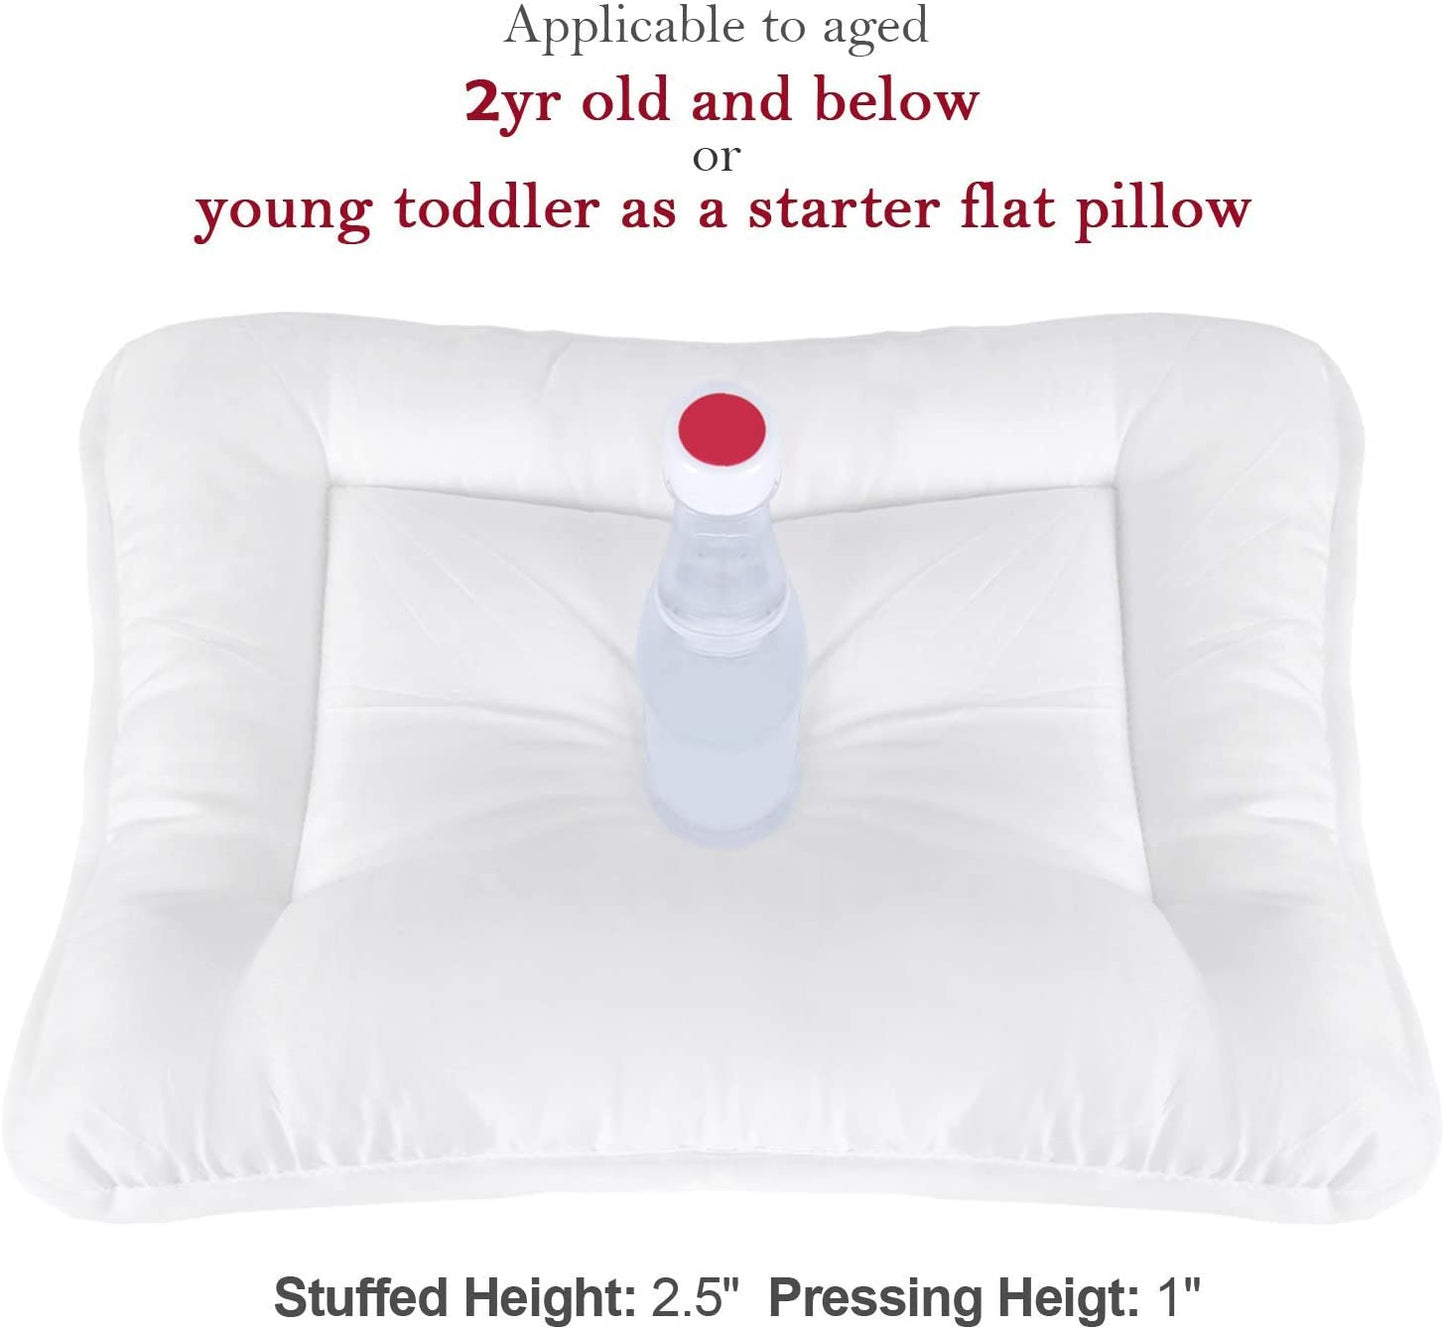 Toddler Pillow Quilted with Pillowcase - 13" x 18", 100% Cotton, Ultra Soft & Breathable, Grey - Biloban Online Store